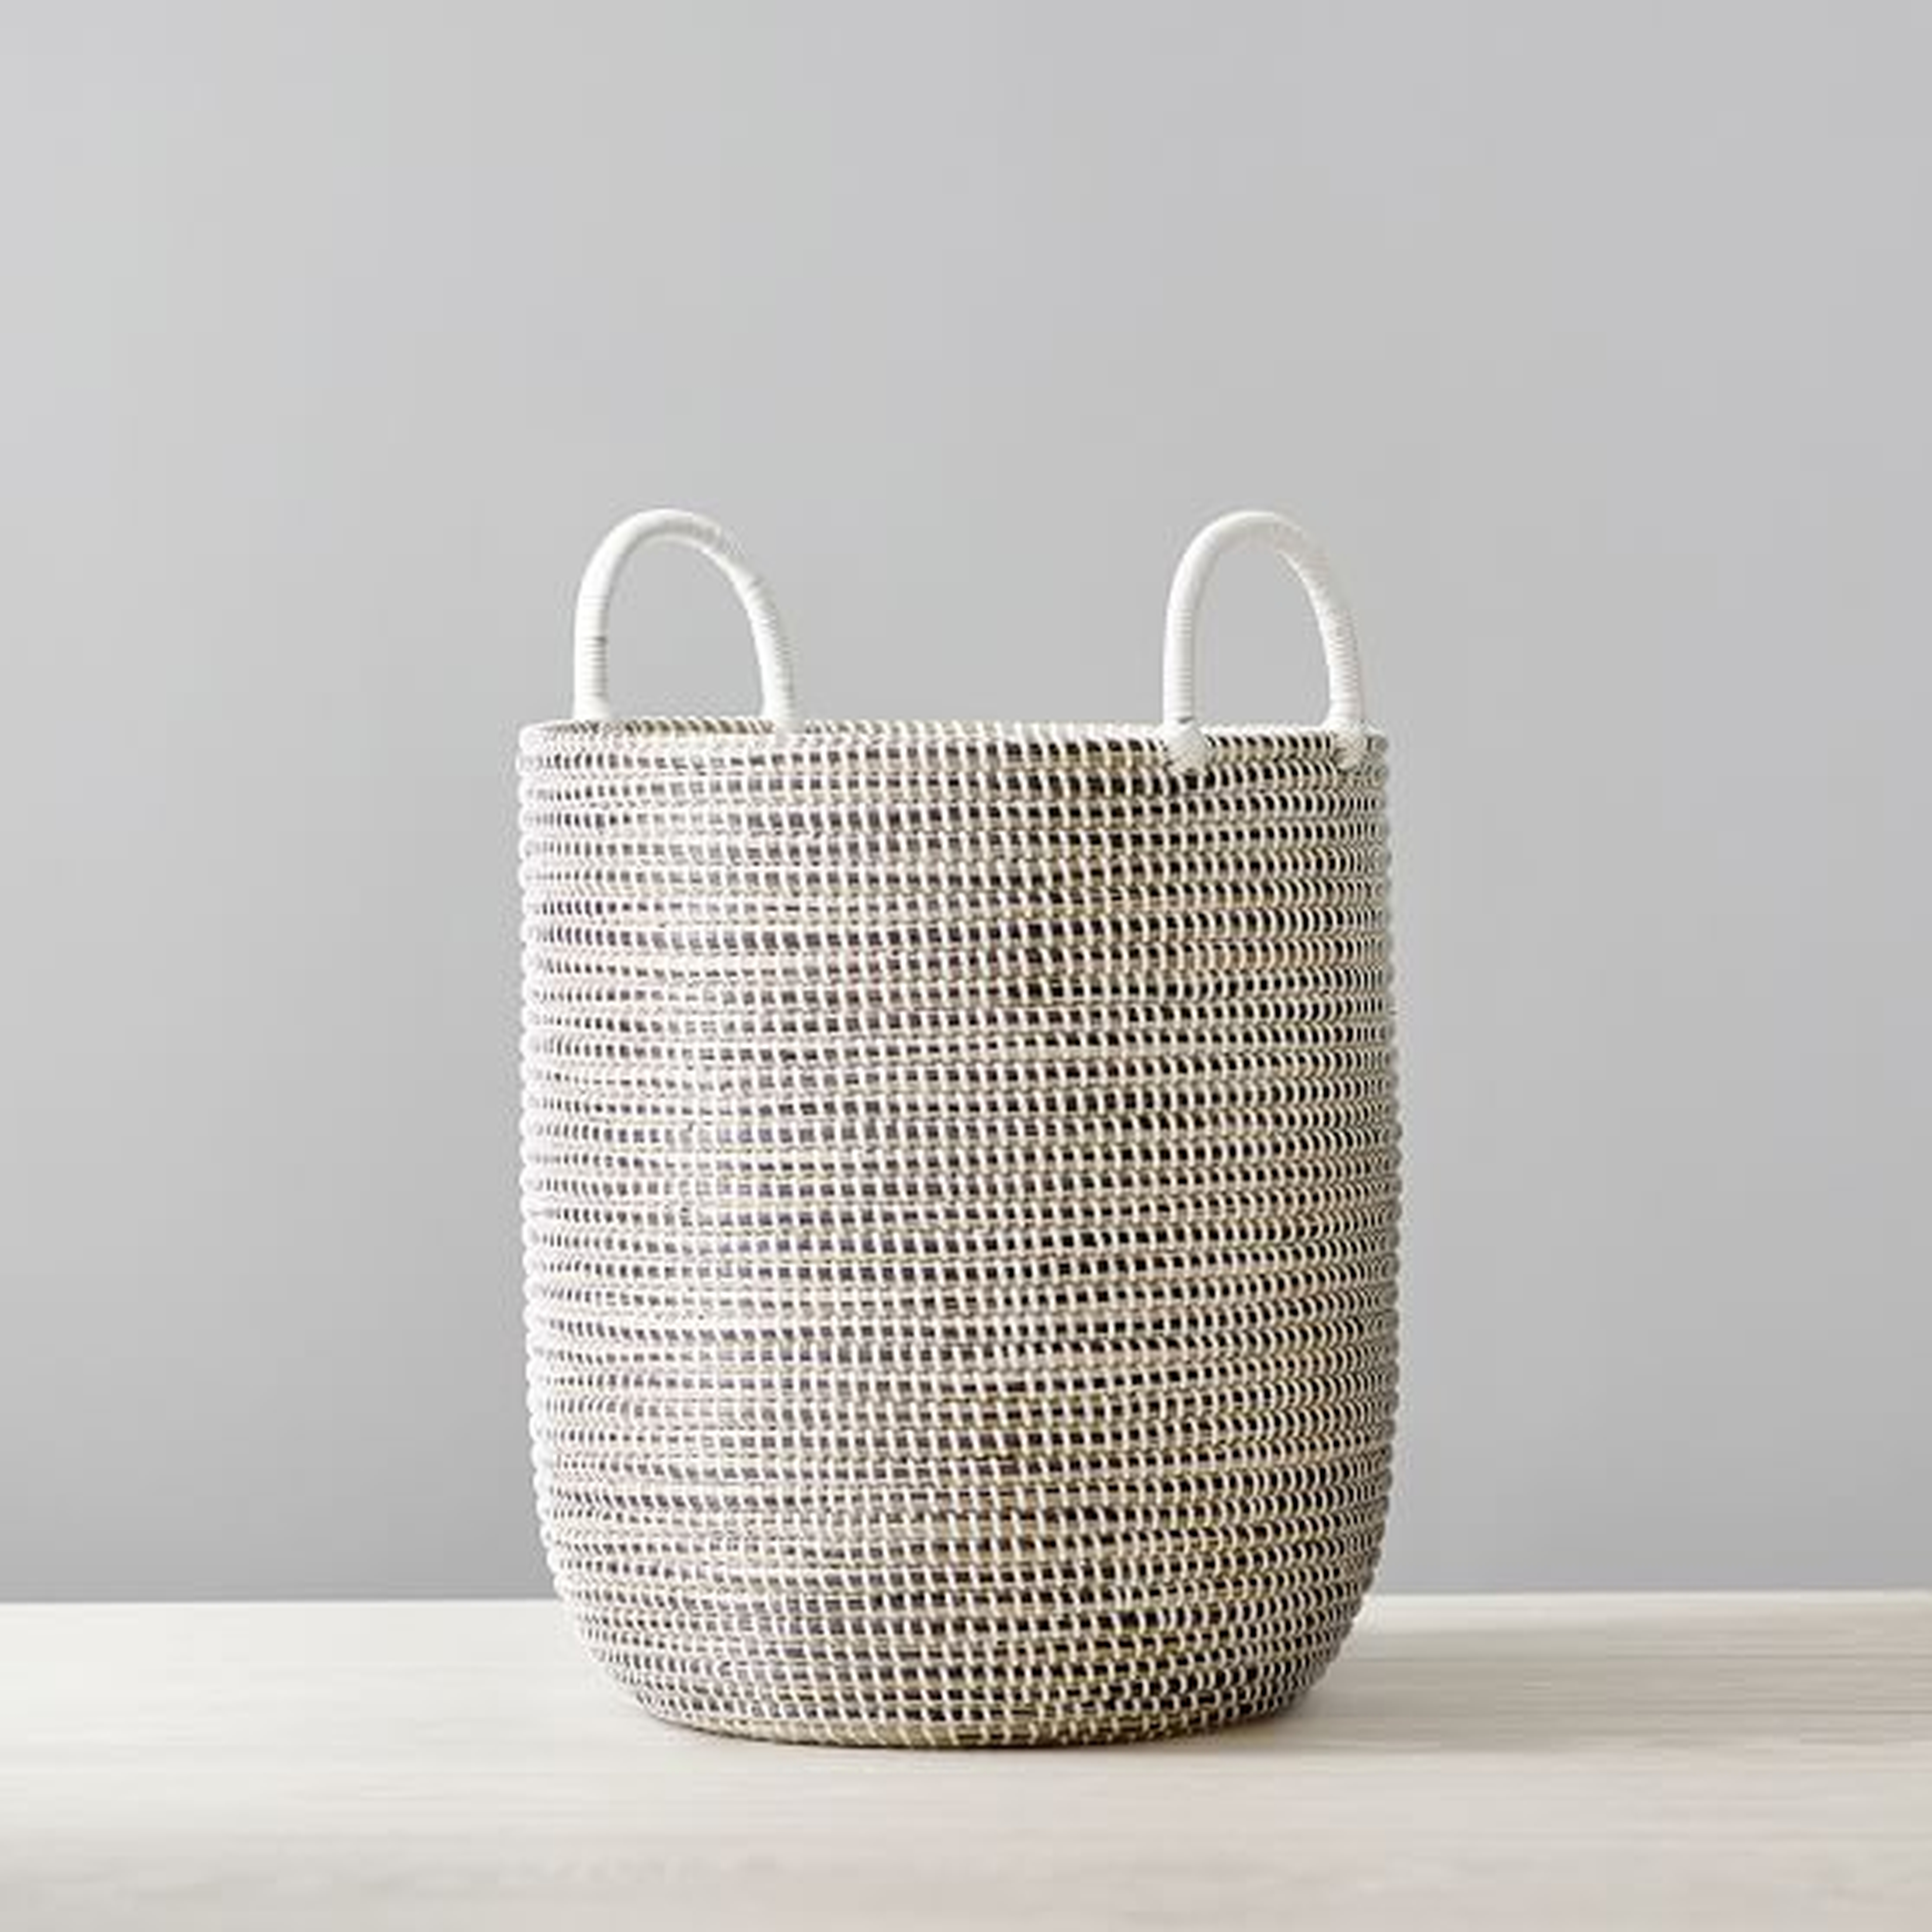 Woven Seagrass Storage Basket - Pottery Barn